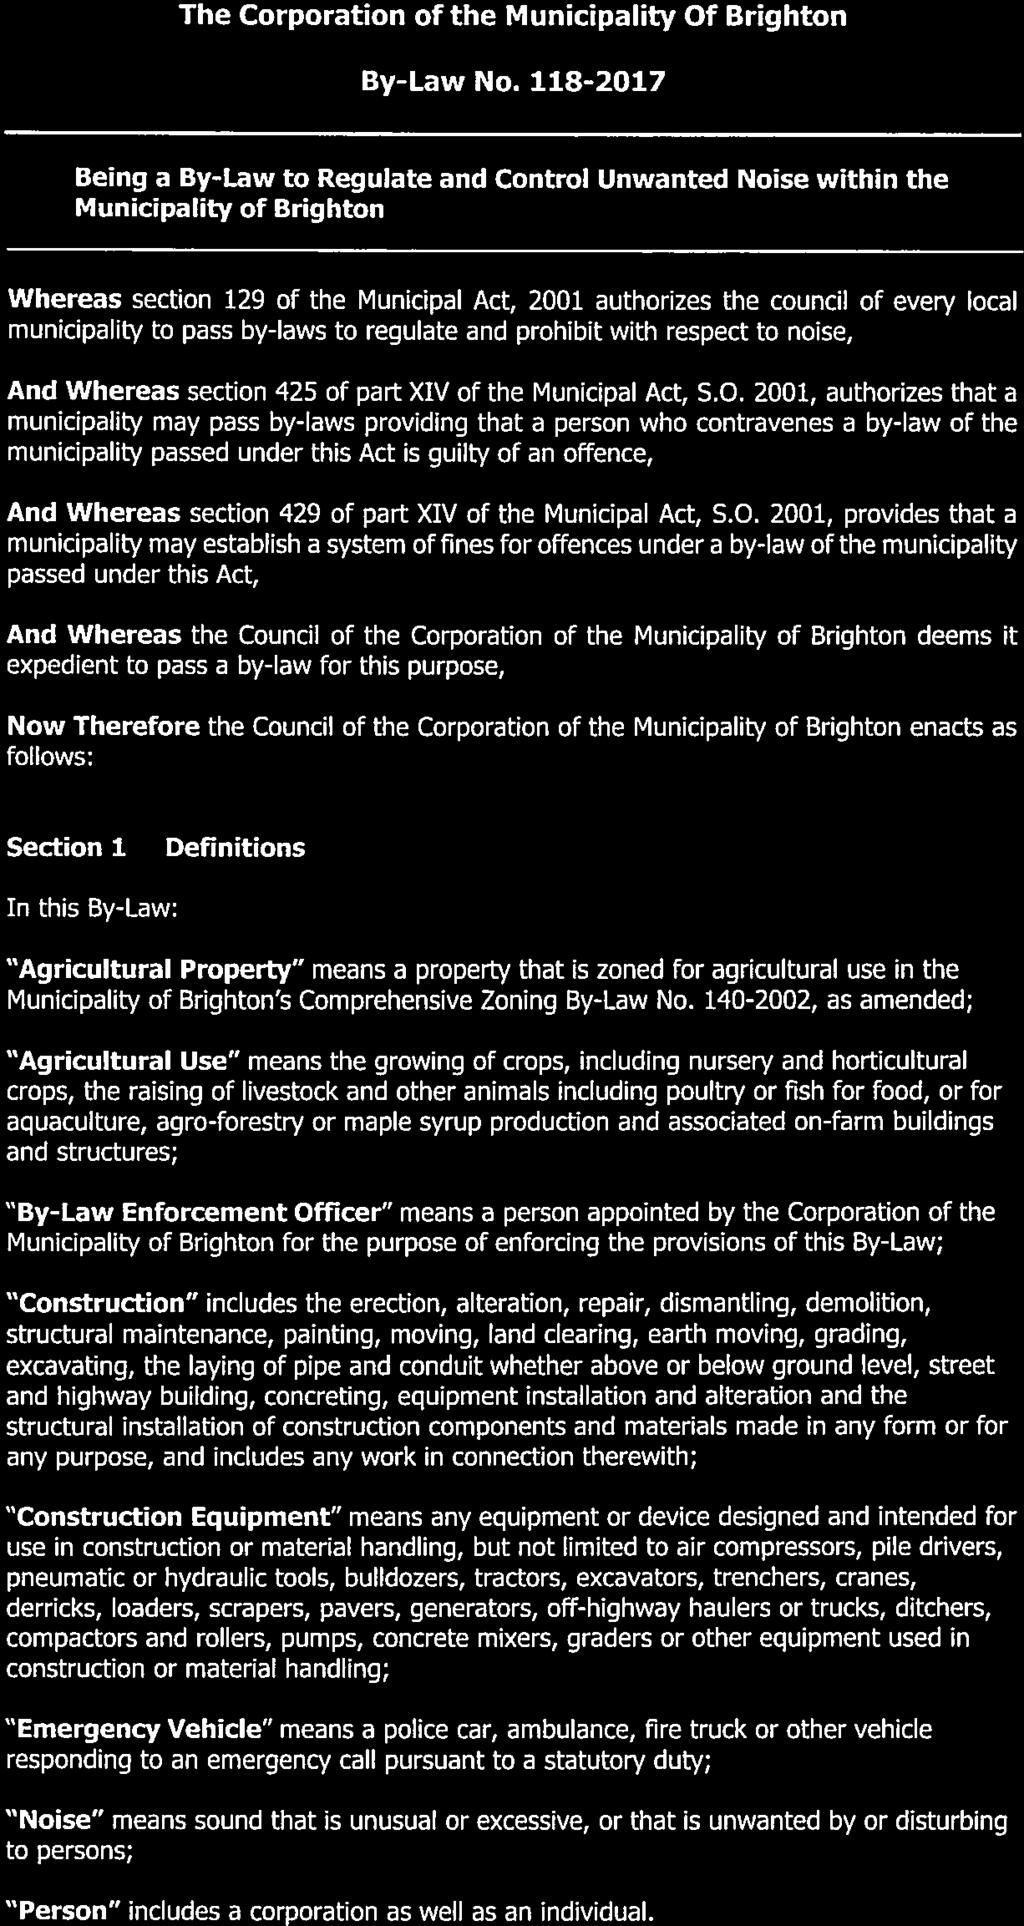 The Corporation of the Municipality Of Brighton By-Law No.